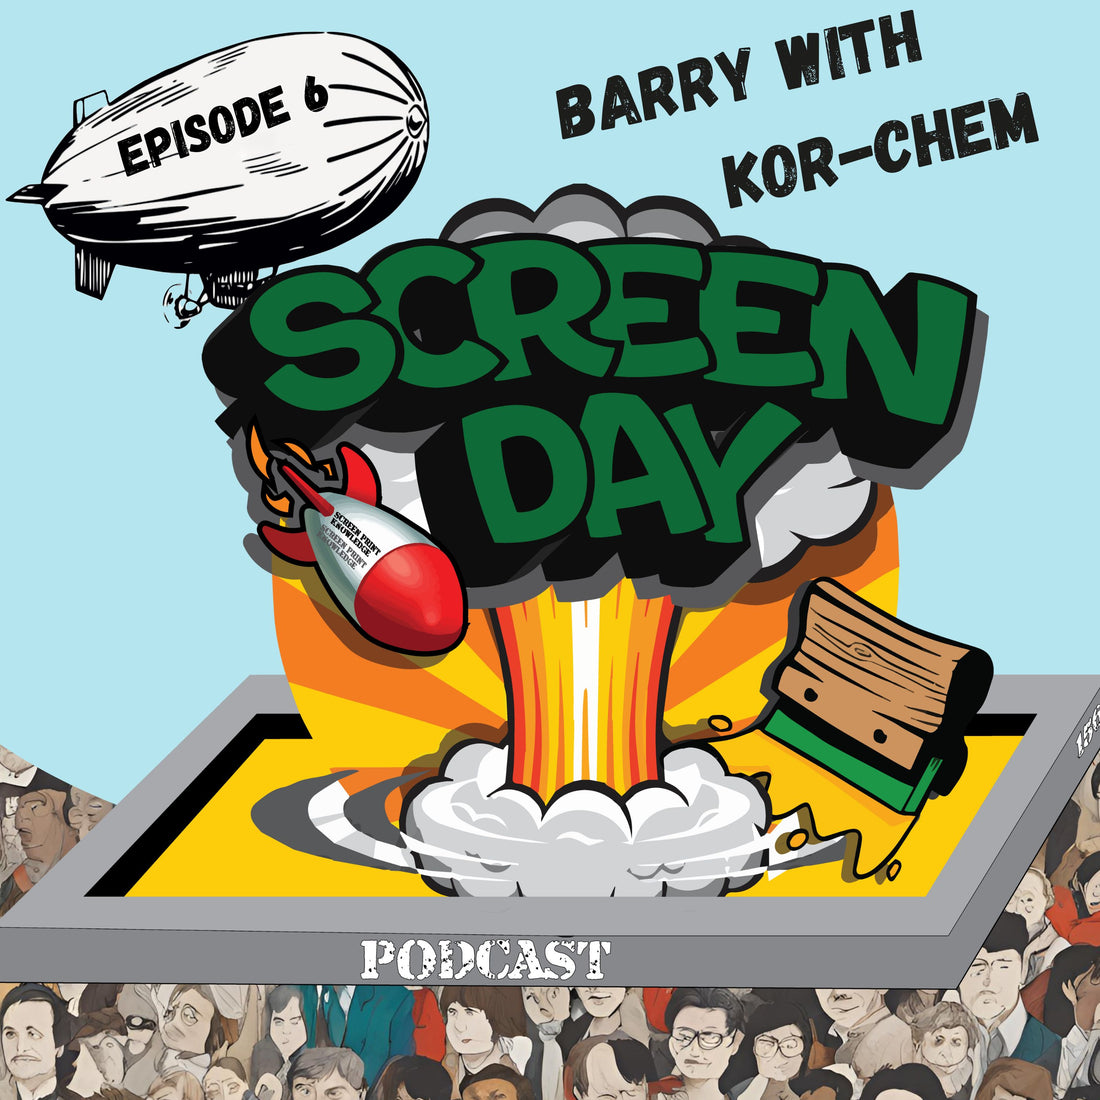 Screen Day Podcast Episode 6 - Barry with KorChem